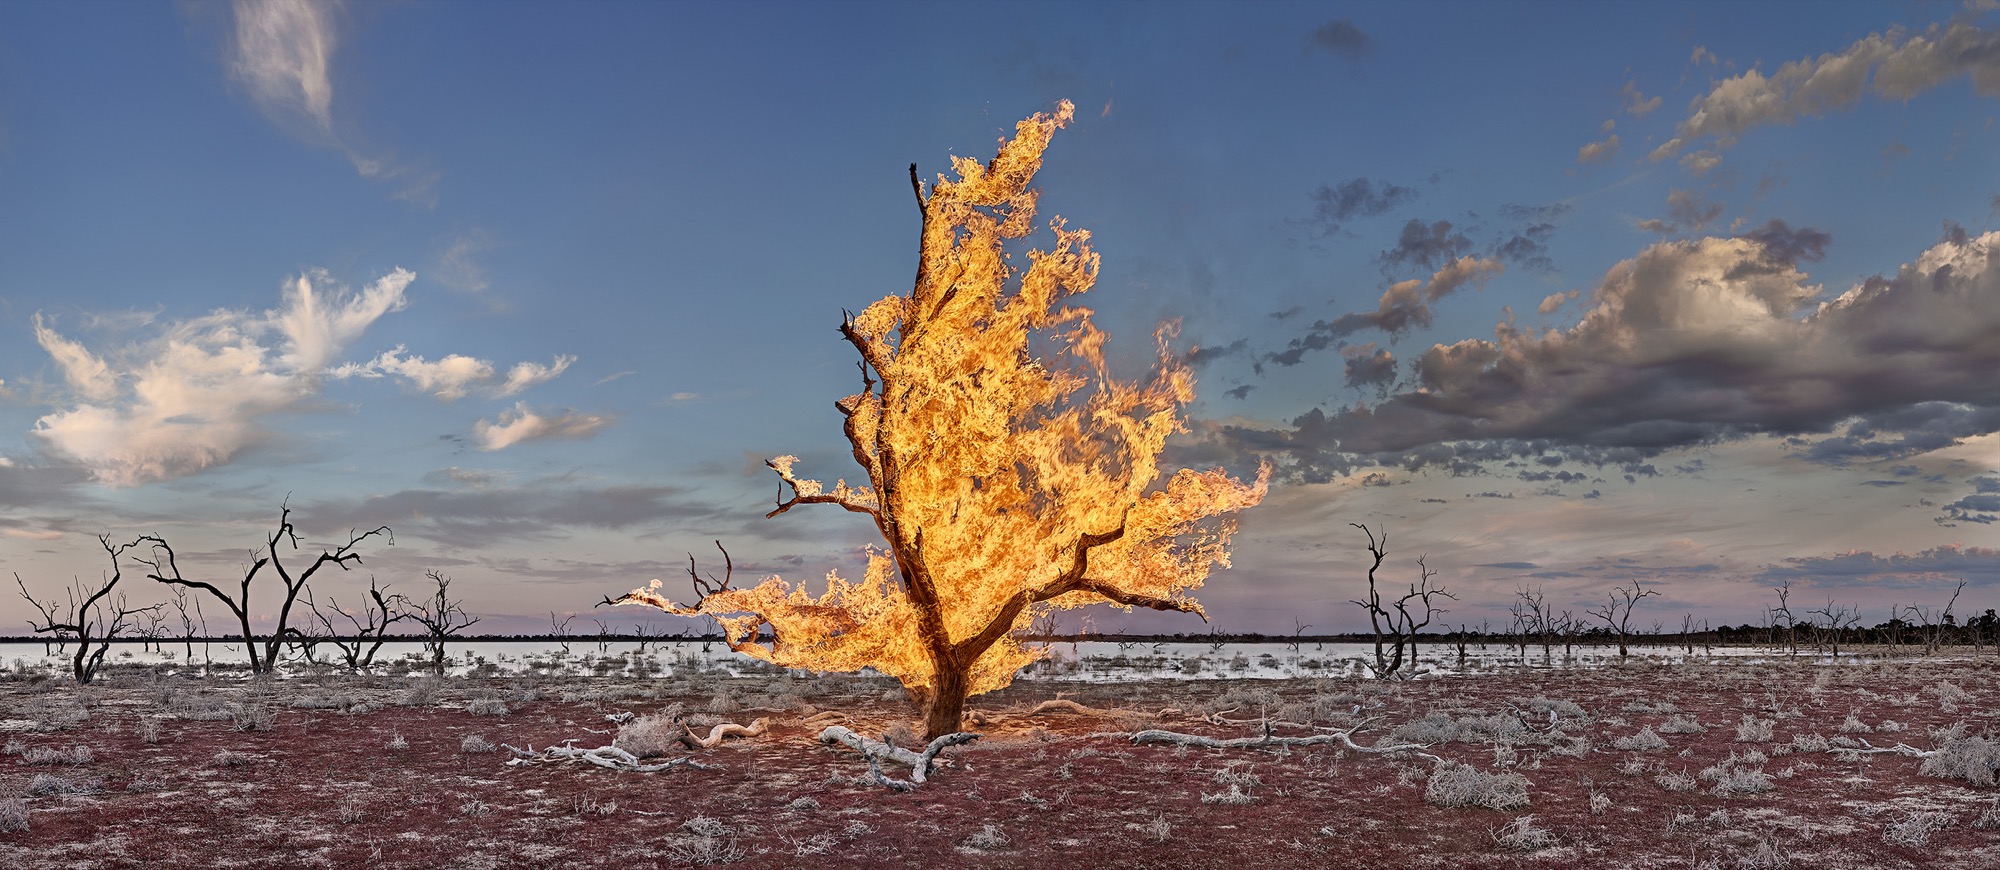 Murray Fredericks, <em>Blaze #16, Packers Lake, Great Darling Anabranch</em>, 2022. Digital pigment print on cotton rag, edition of 5 + 2 A/P, 106 x 270 cm. Courtesy of the artist and ARC ONE Gallery